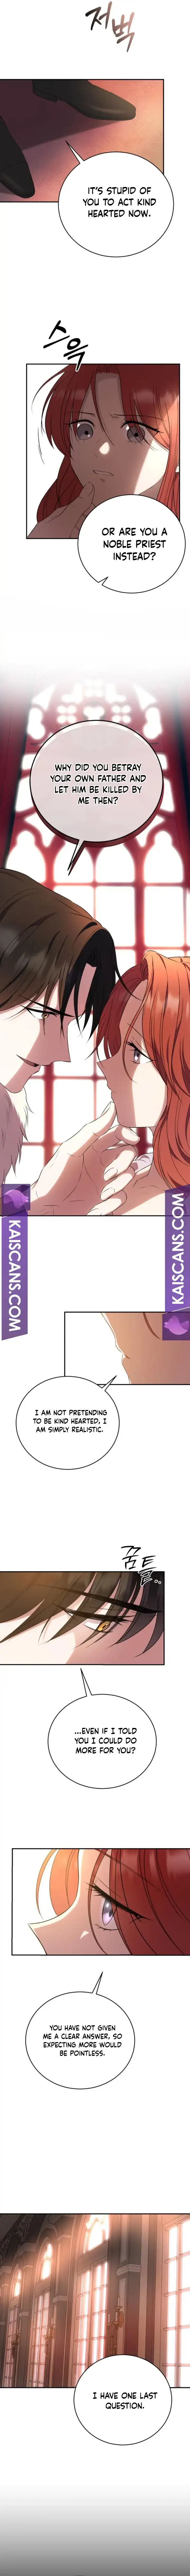 An unexpected proposal Chapter 1 - page 11